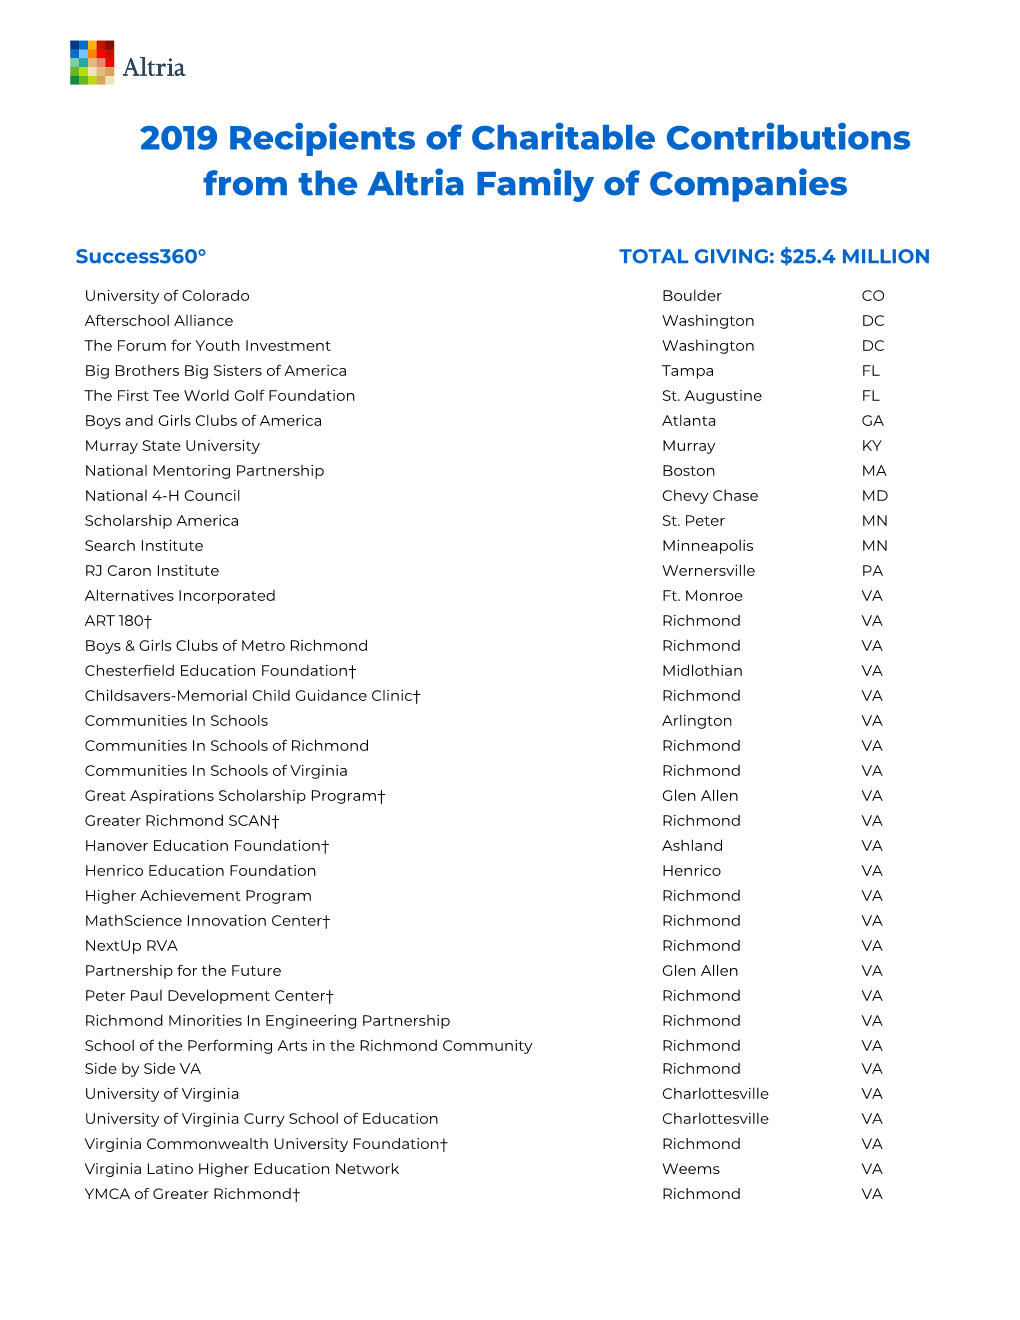 2019 Recipients of Charitable Contributions from the Altria Family of Companies